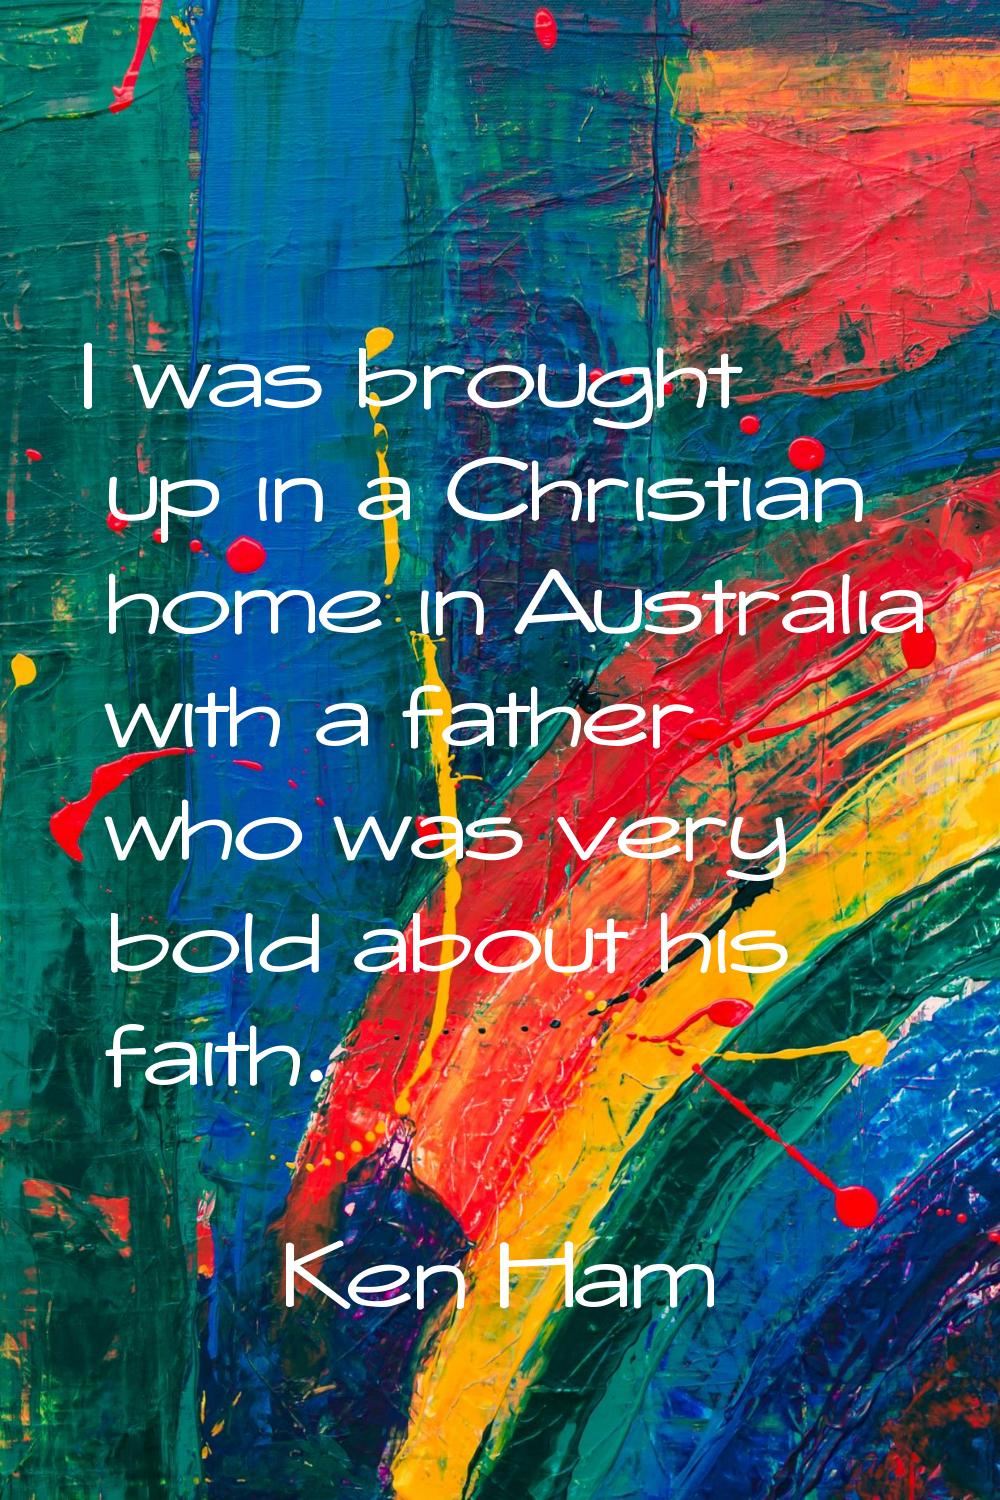 I was brought up in a Christian home in Australia with a father who was very bold about his faith.